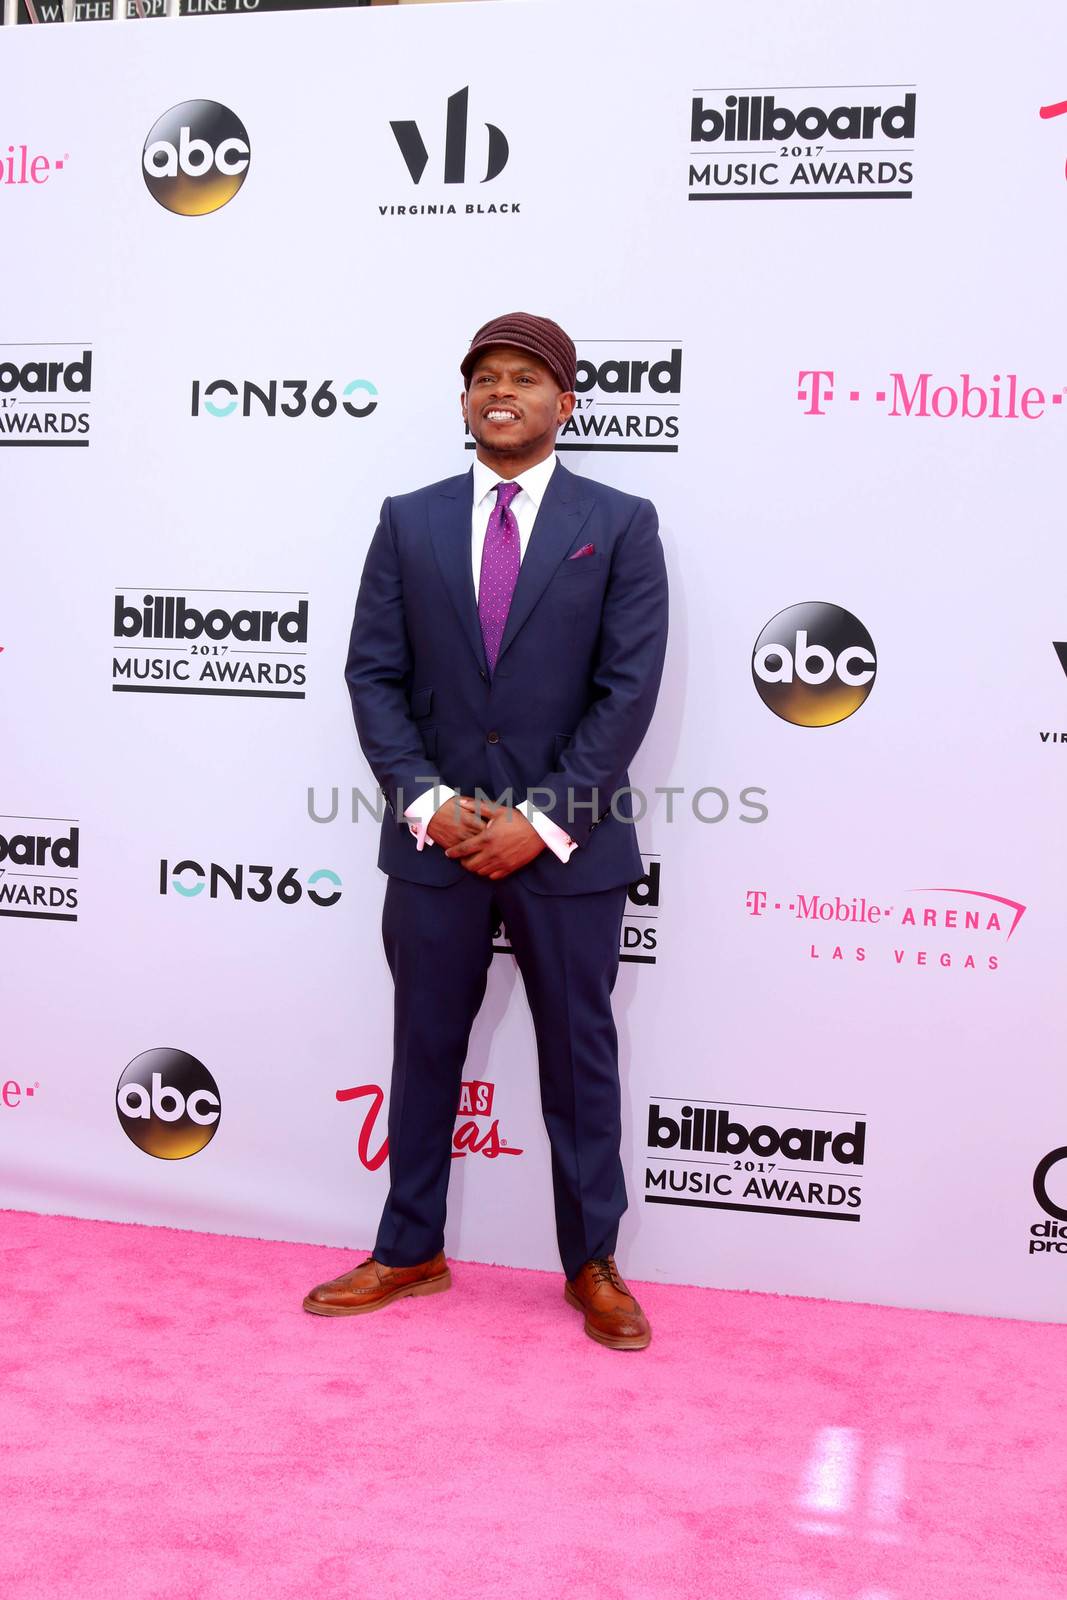 Sway Calloway
at the 2017 Billboard Awards Arrivals, T-Mobile Arena, Las Vegas, NV 05-21-17/ImageCollect by ImageCollect